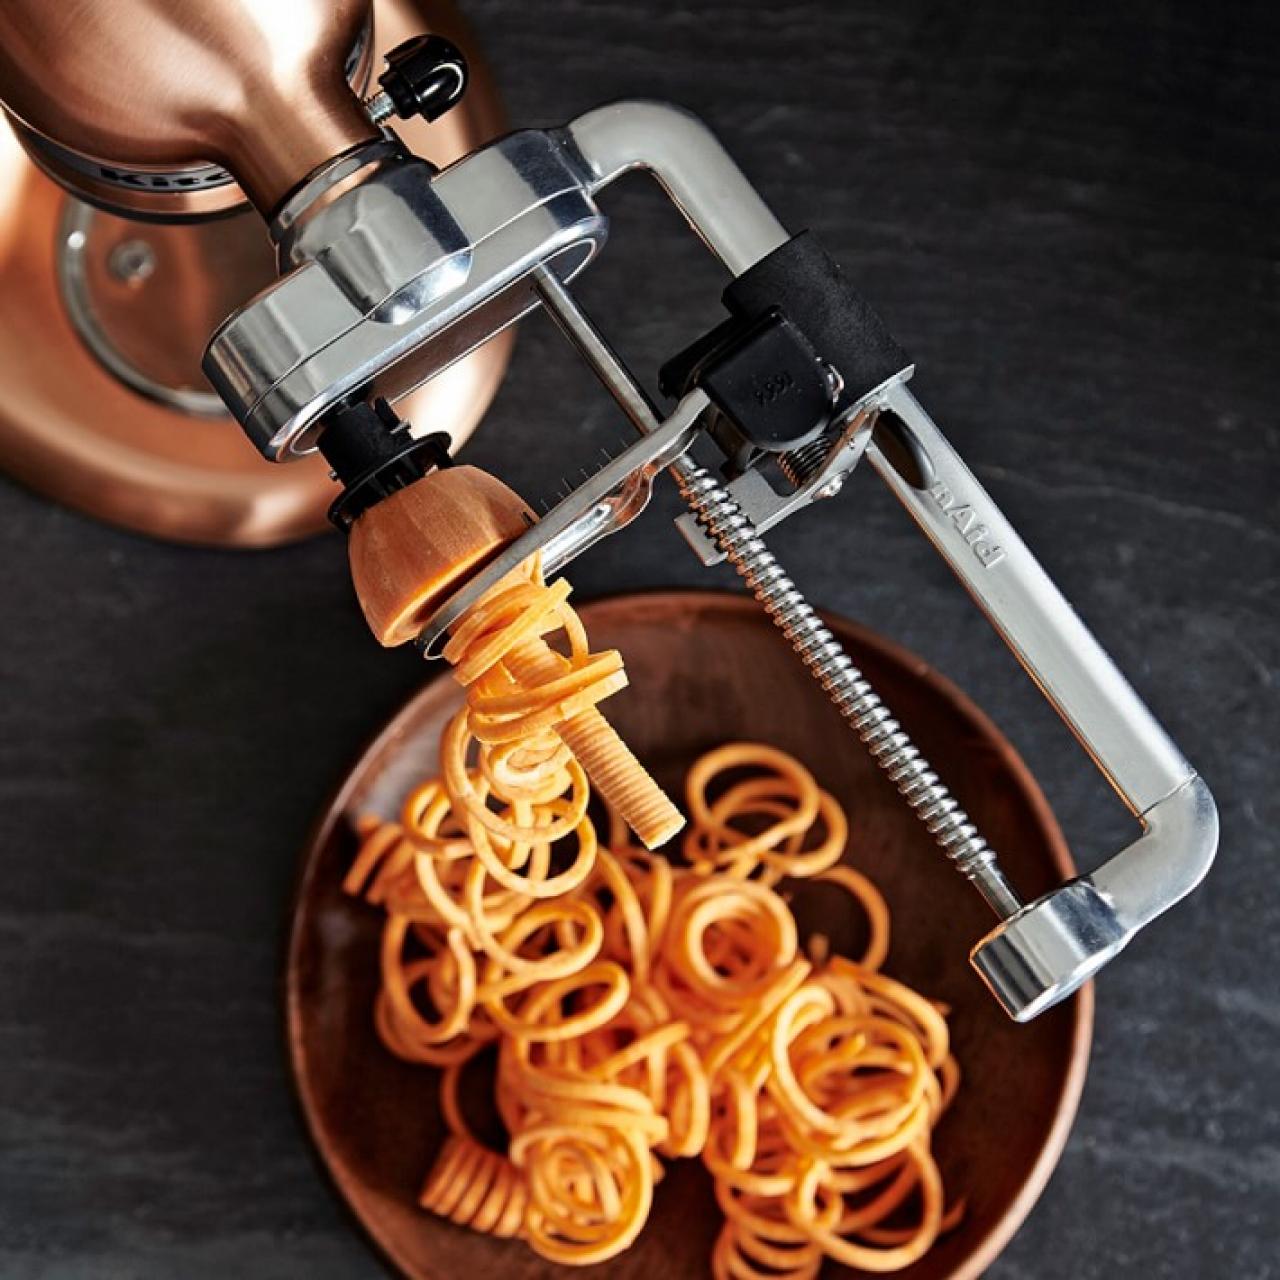 The KitchenAid Spiralizer Is on Sale at Willimas Sonoma